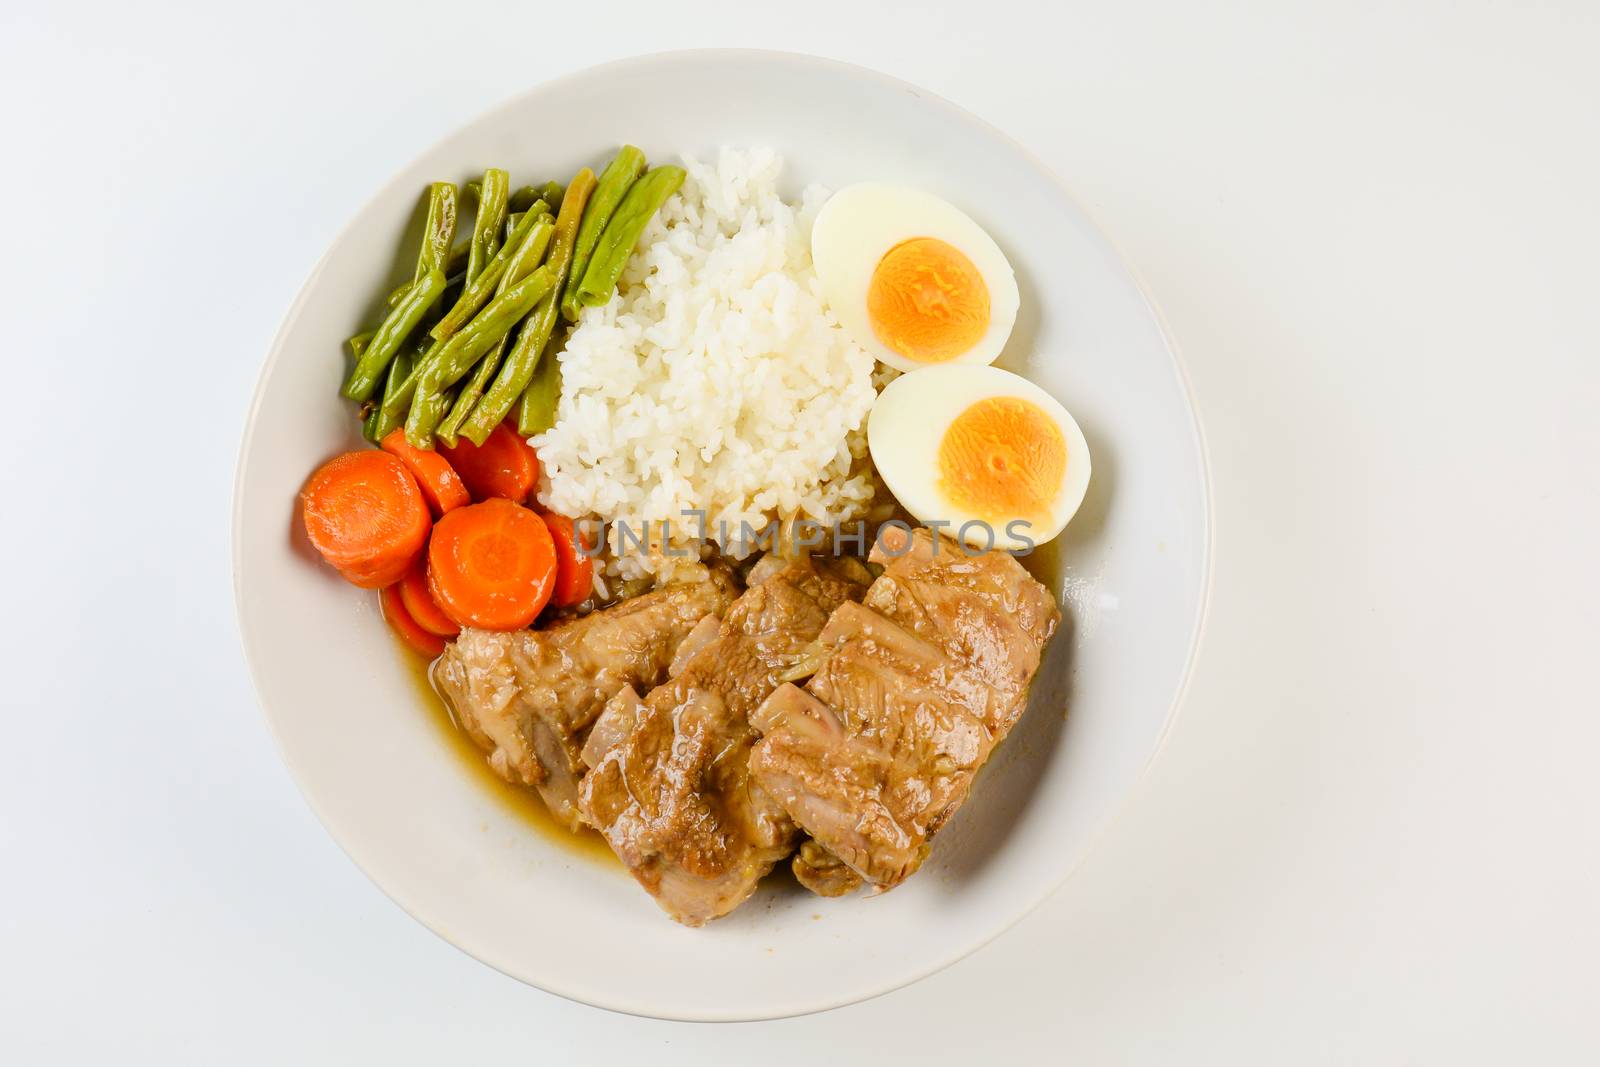 Baked pork ribs with rice, boiled egg and vegetable by yuiyuize